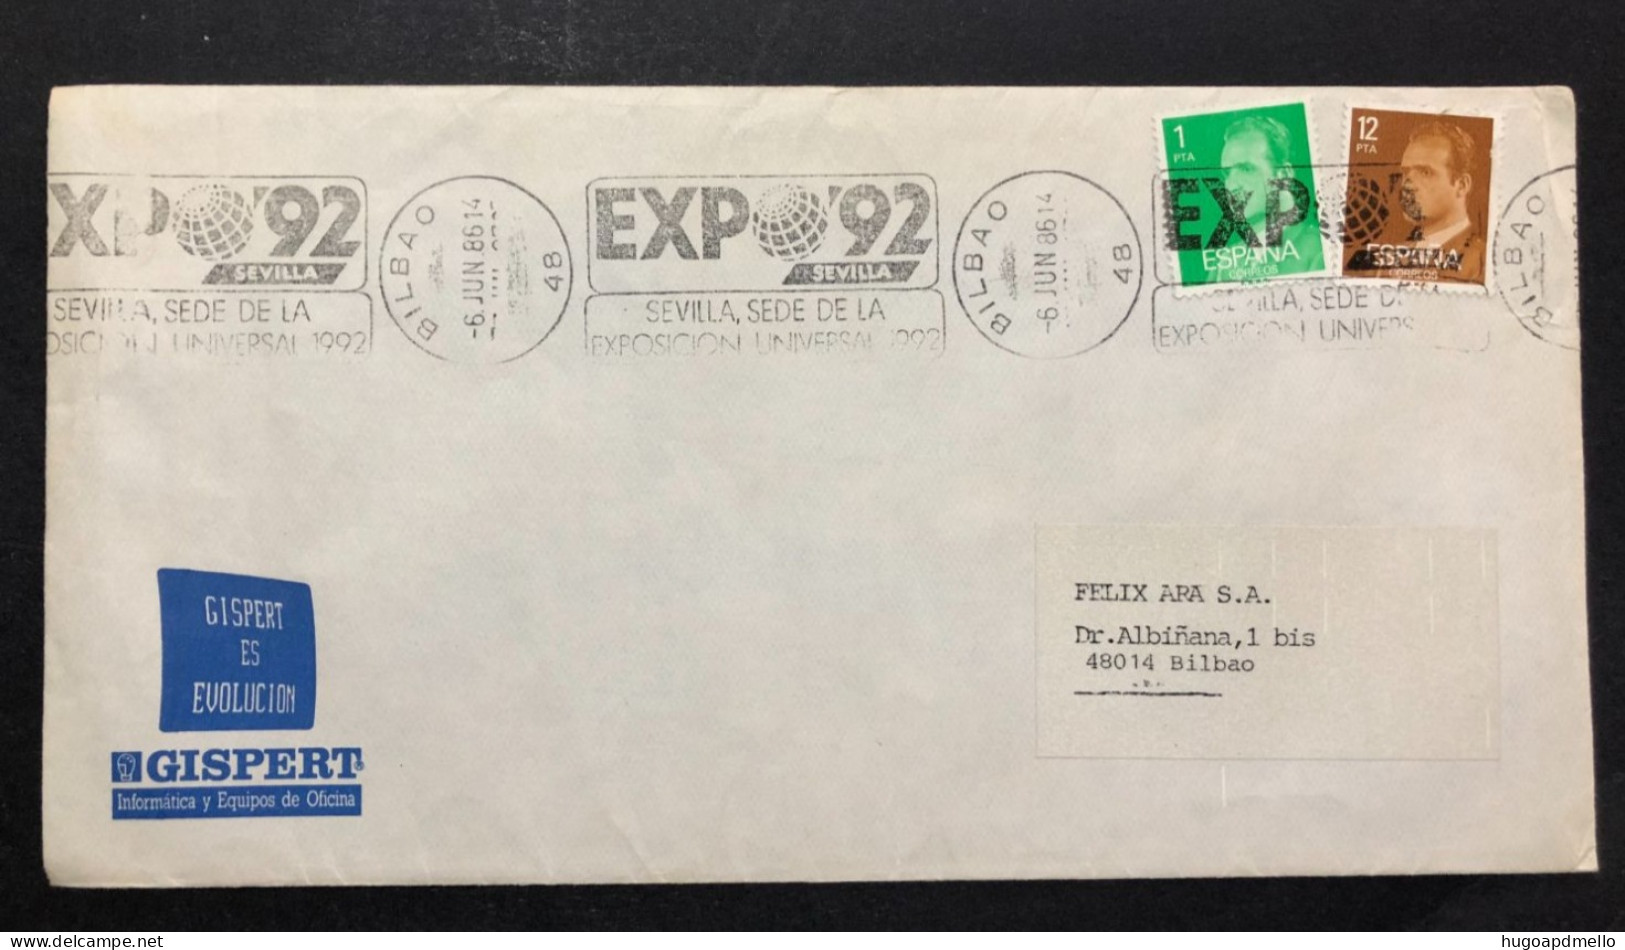 SPAIN, Cover With Special Cancellation « EXPO '92 », « BILBAO Postmark », 1986 - 1992 – Séville (Espagne)